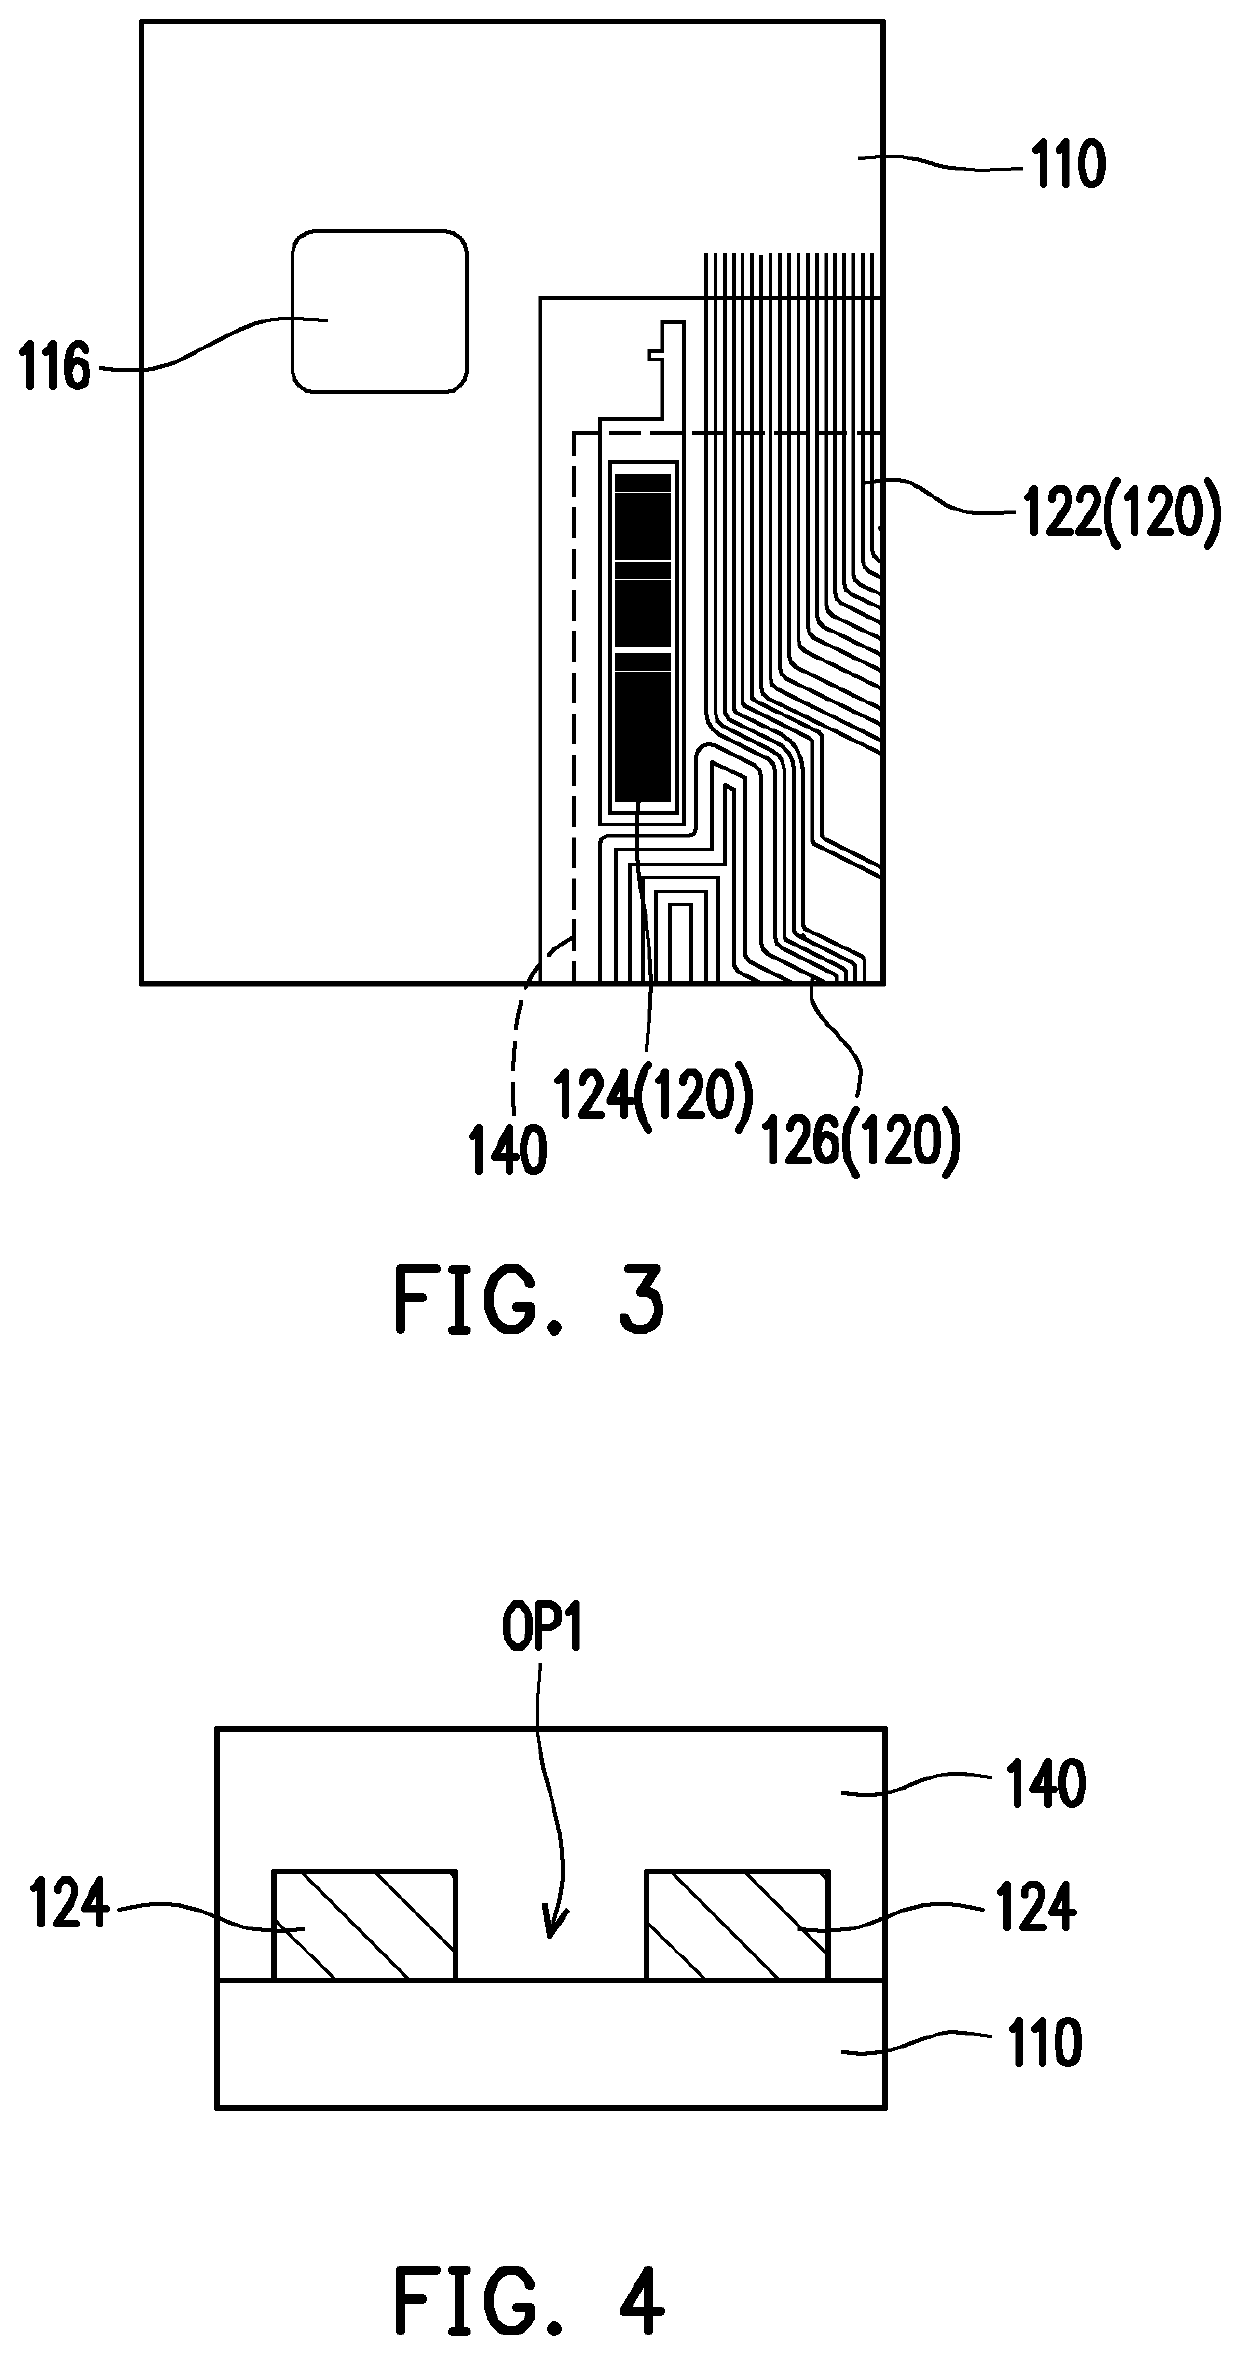 Chip on film package structure and method for reading a code-included pattern on a package structure